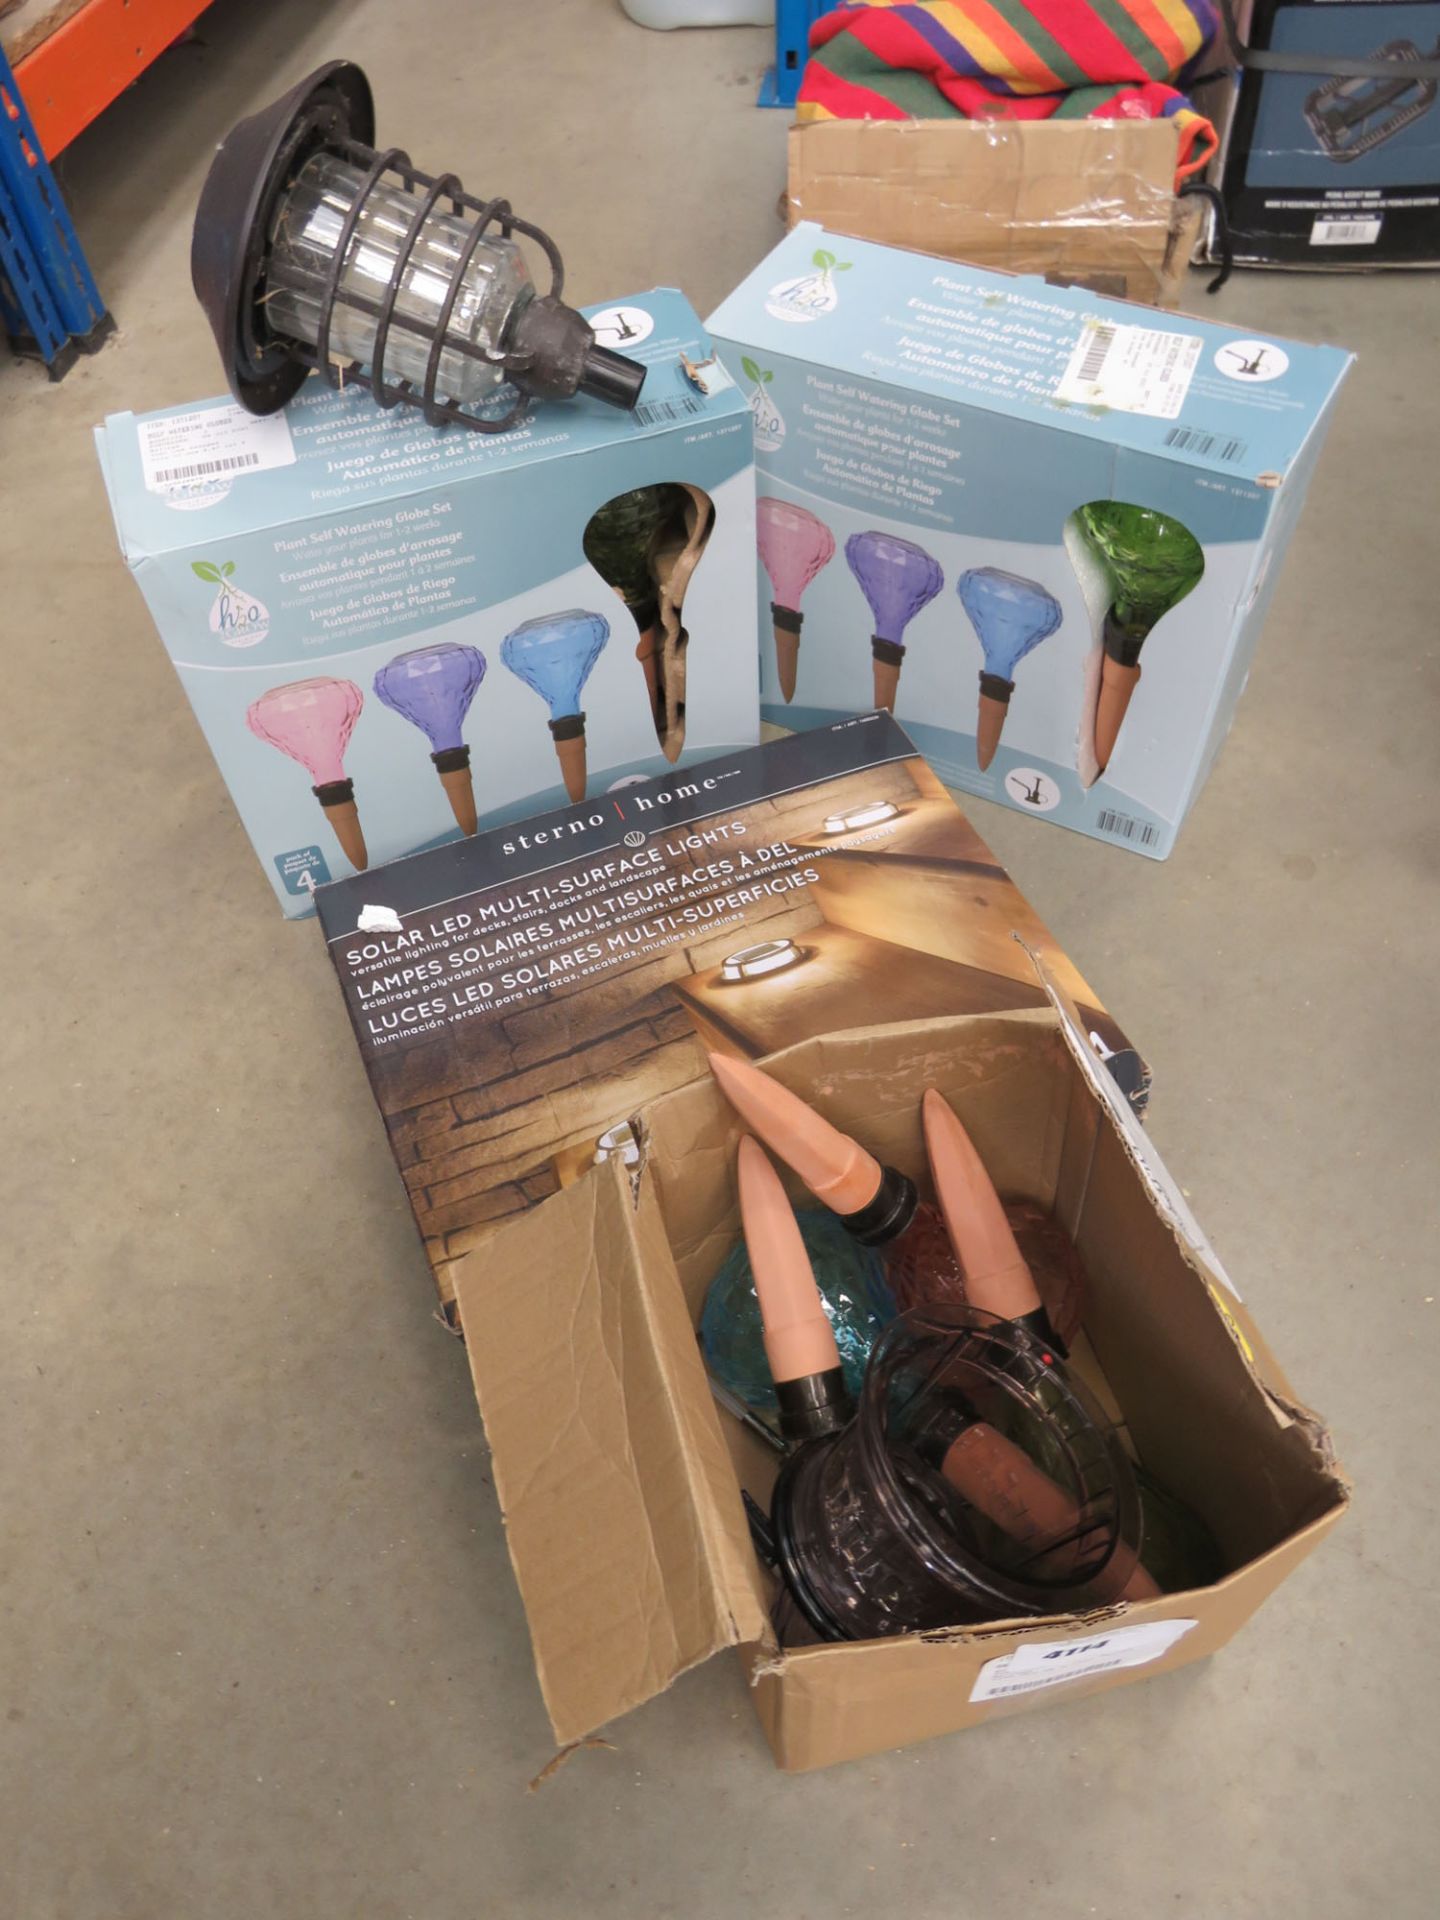 3 boxes of self watering globes and a set of solar led surface lights